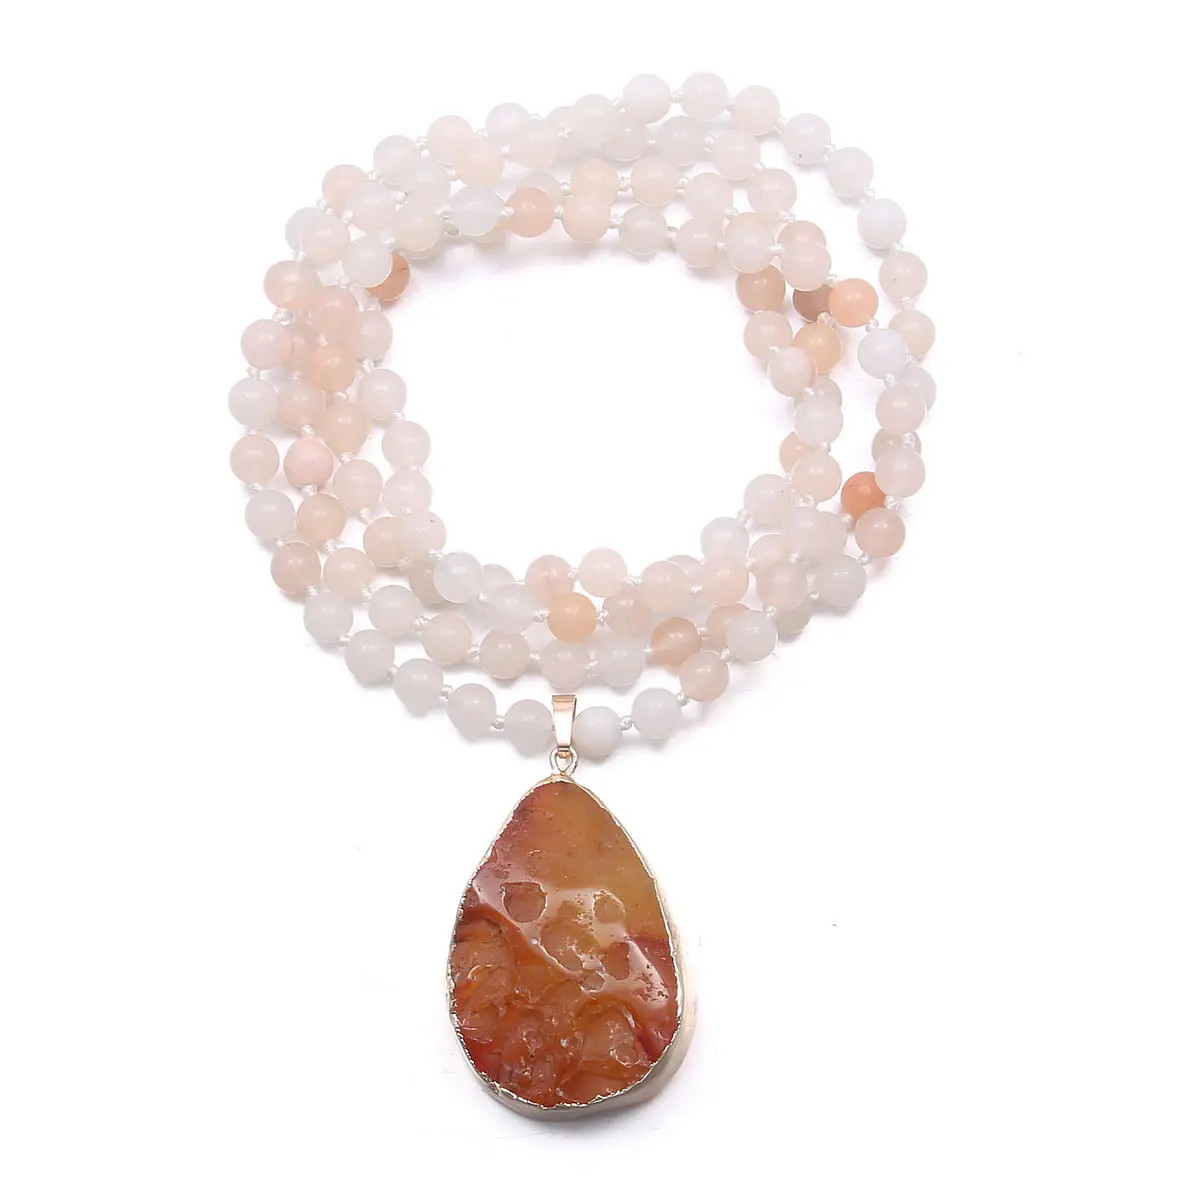 

New Necklace Natural Semi-Precious Stone Pink Aventurine Round Beads Agate Pendant Necklace for Women Men Charm Jewelry Gift